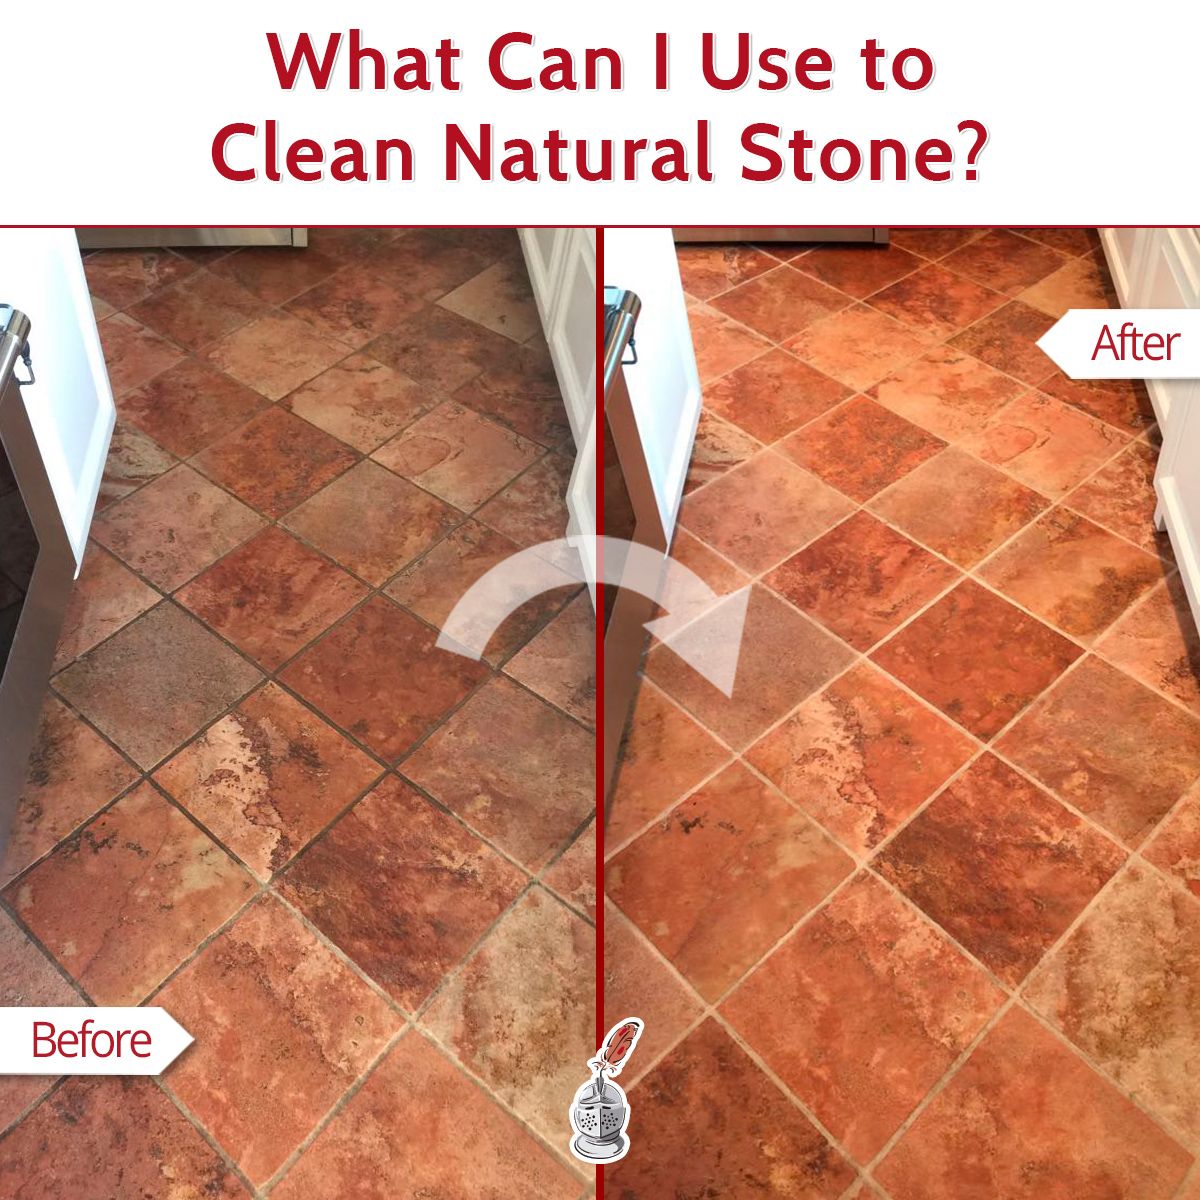 What Can I Use to Clean Natural Stone?